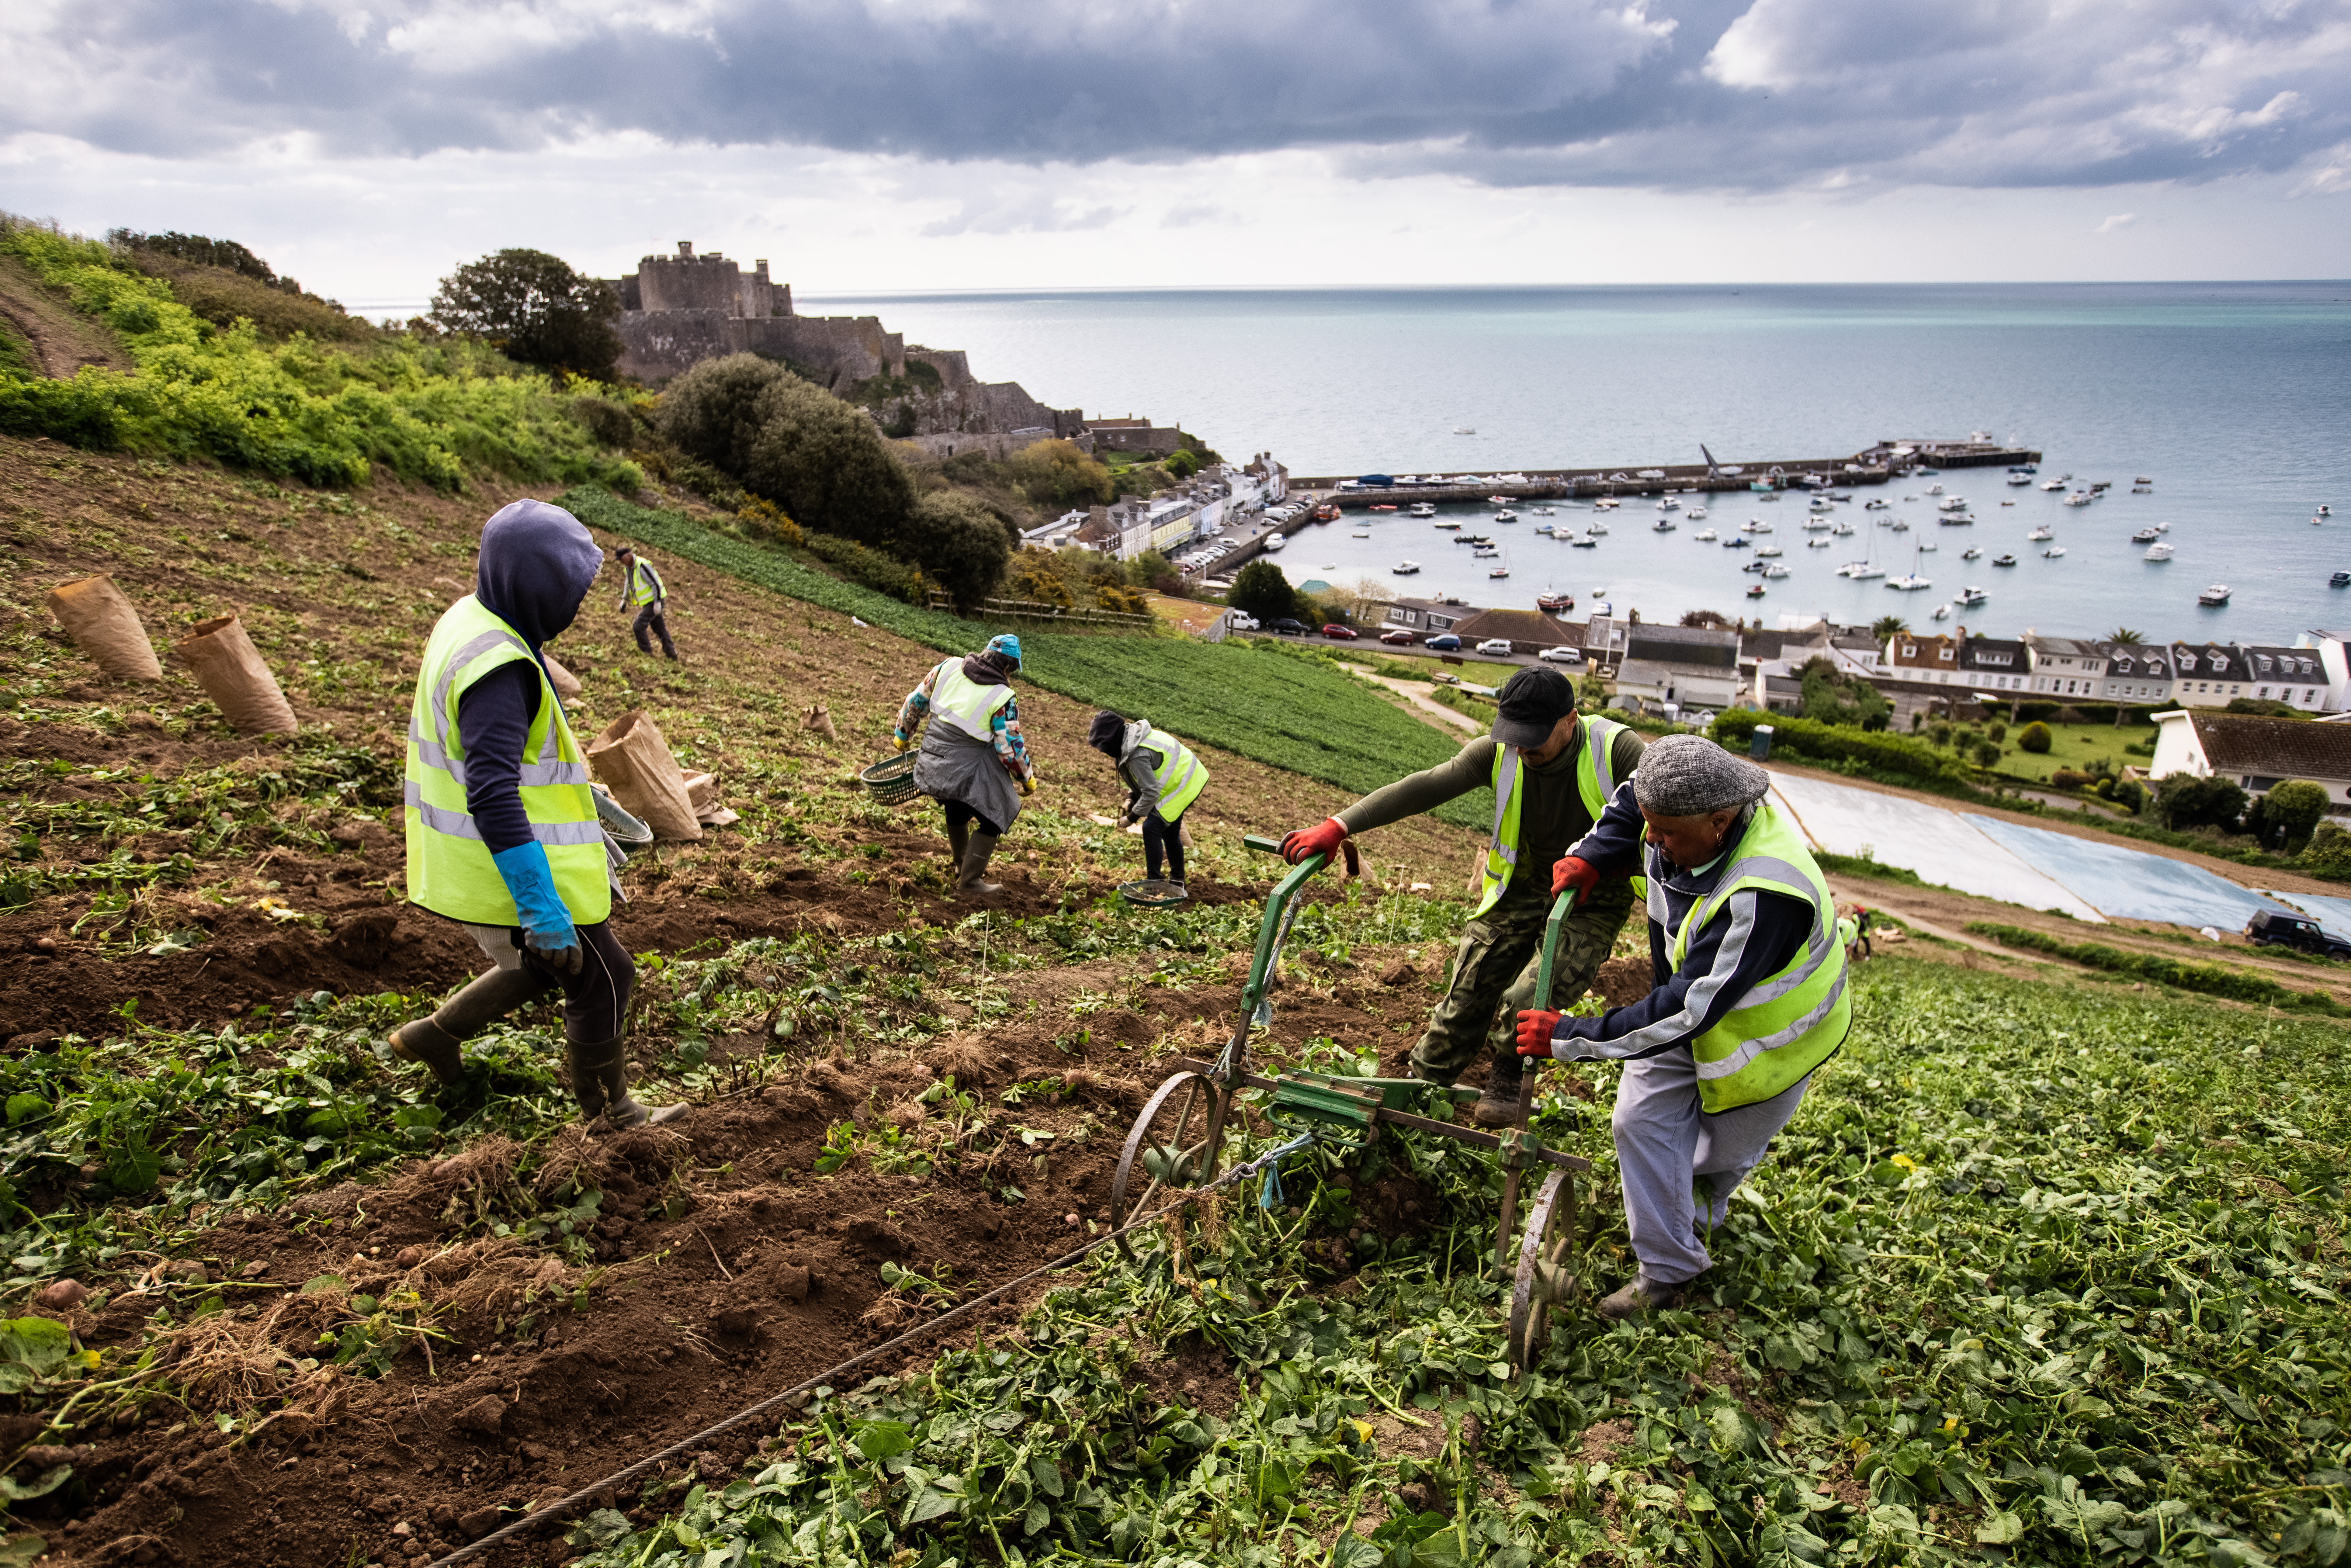 Jersey Royal potatoes being harvested by hand [image: Andy Le Gresley/jerseyroyals.co.uk]